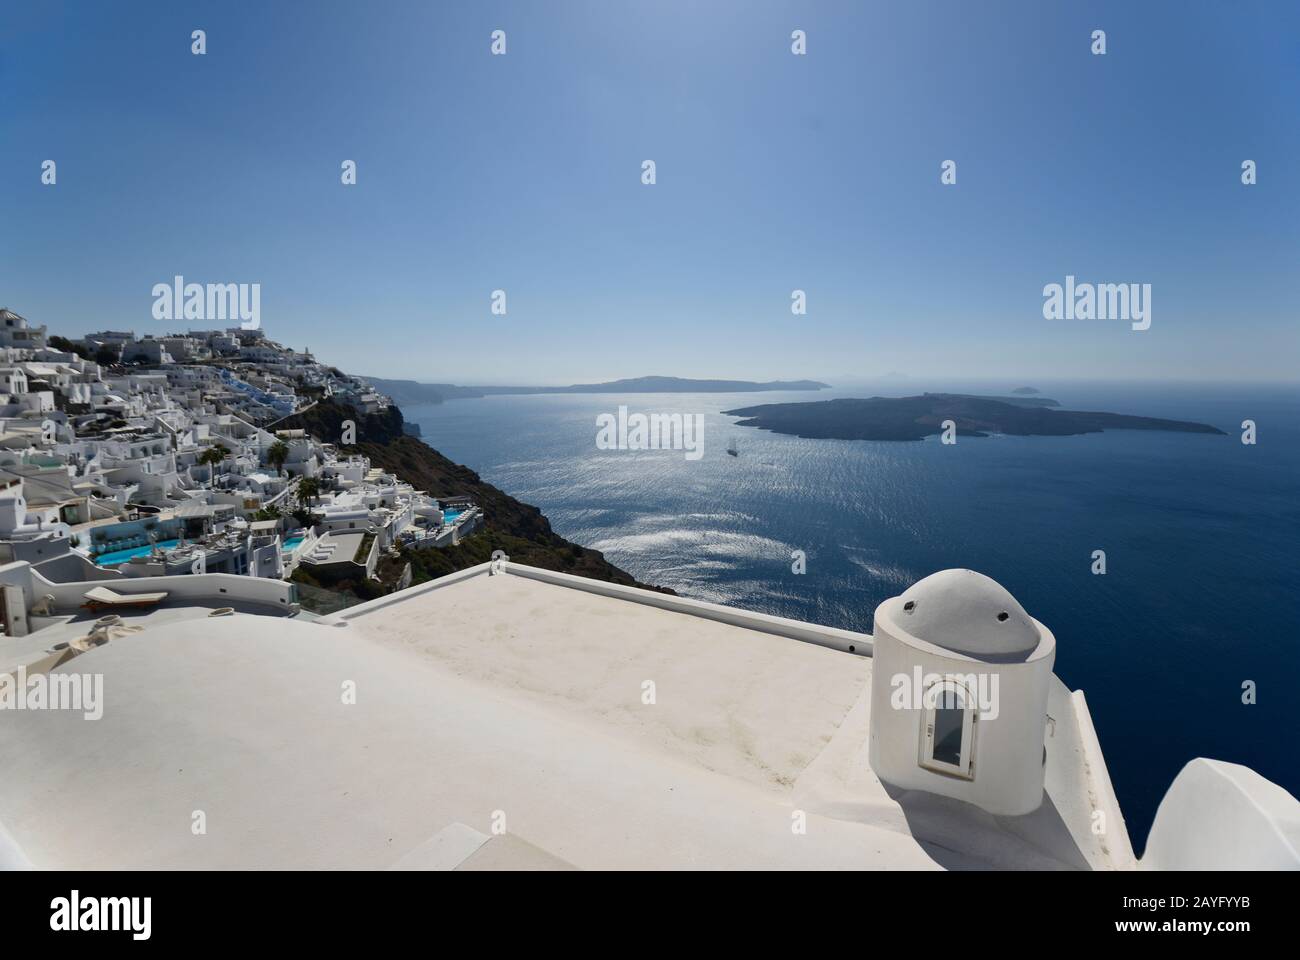 White-washed houses in Fira, Stantorini. Greece Stock Photo